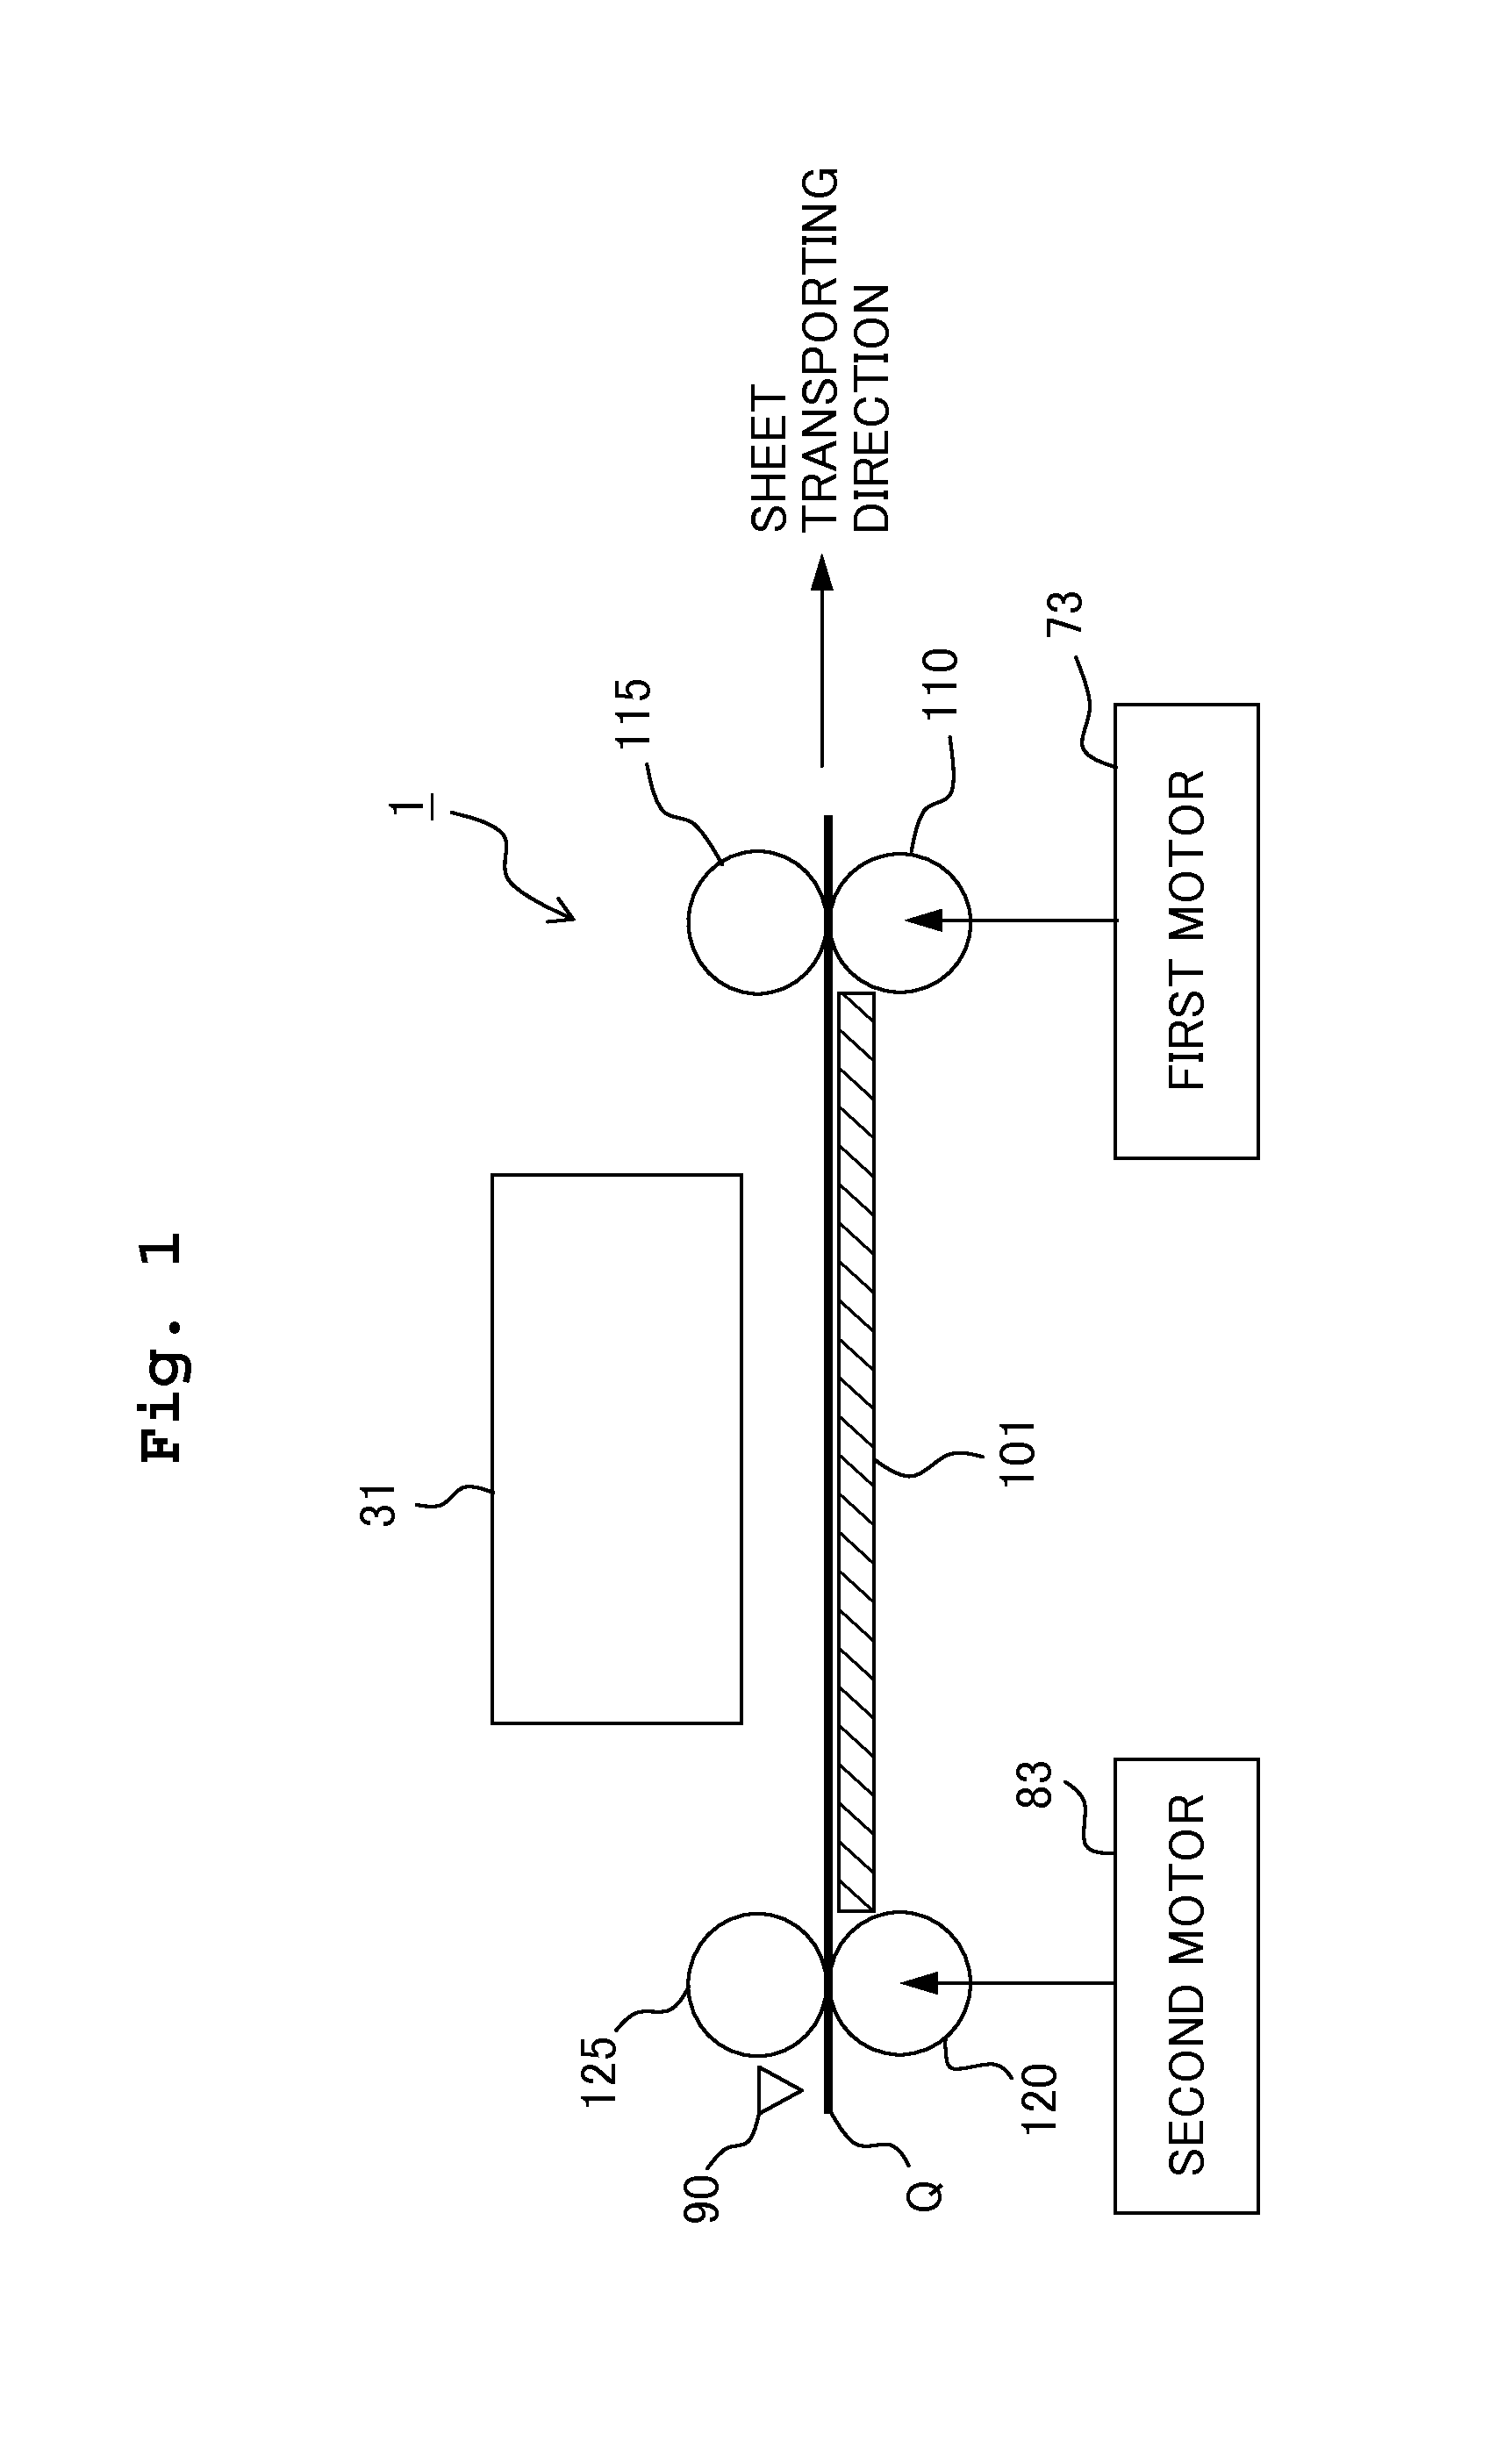 Transporting System, Image Forming System, and Controller